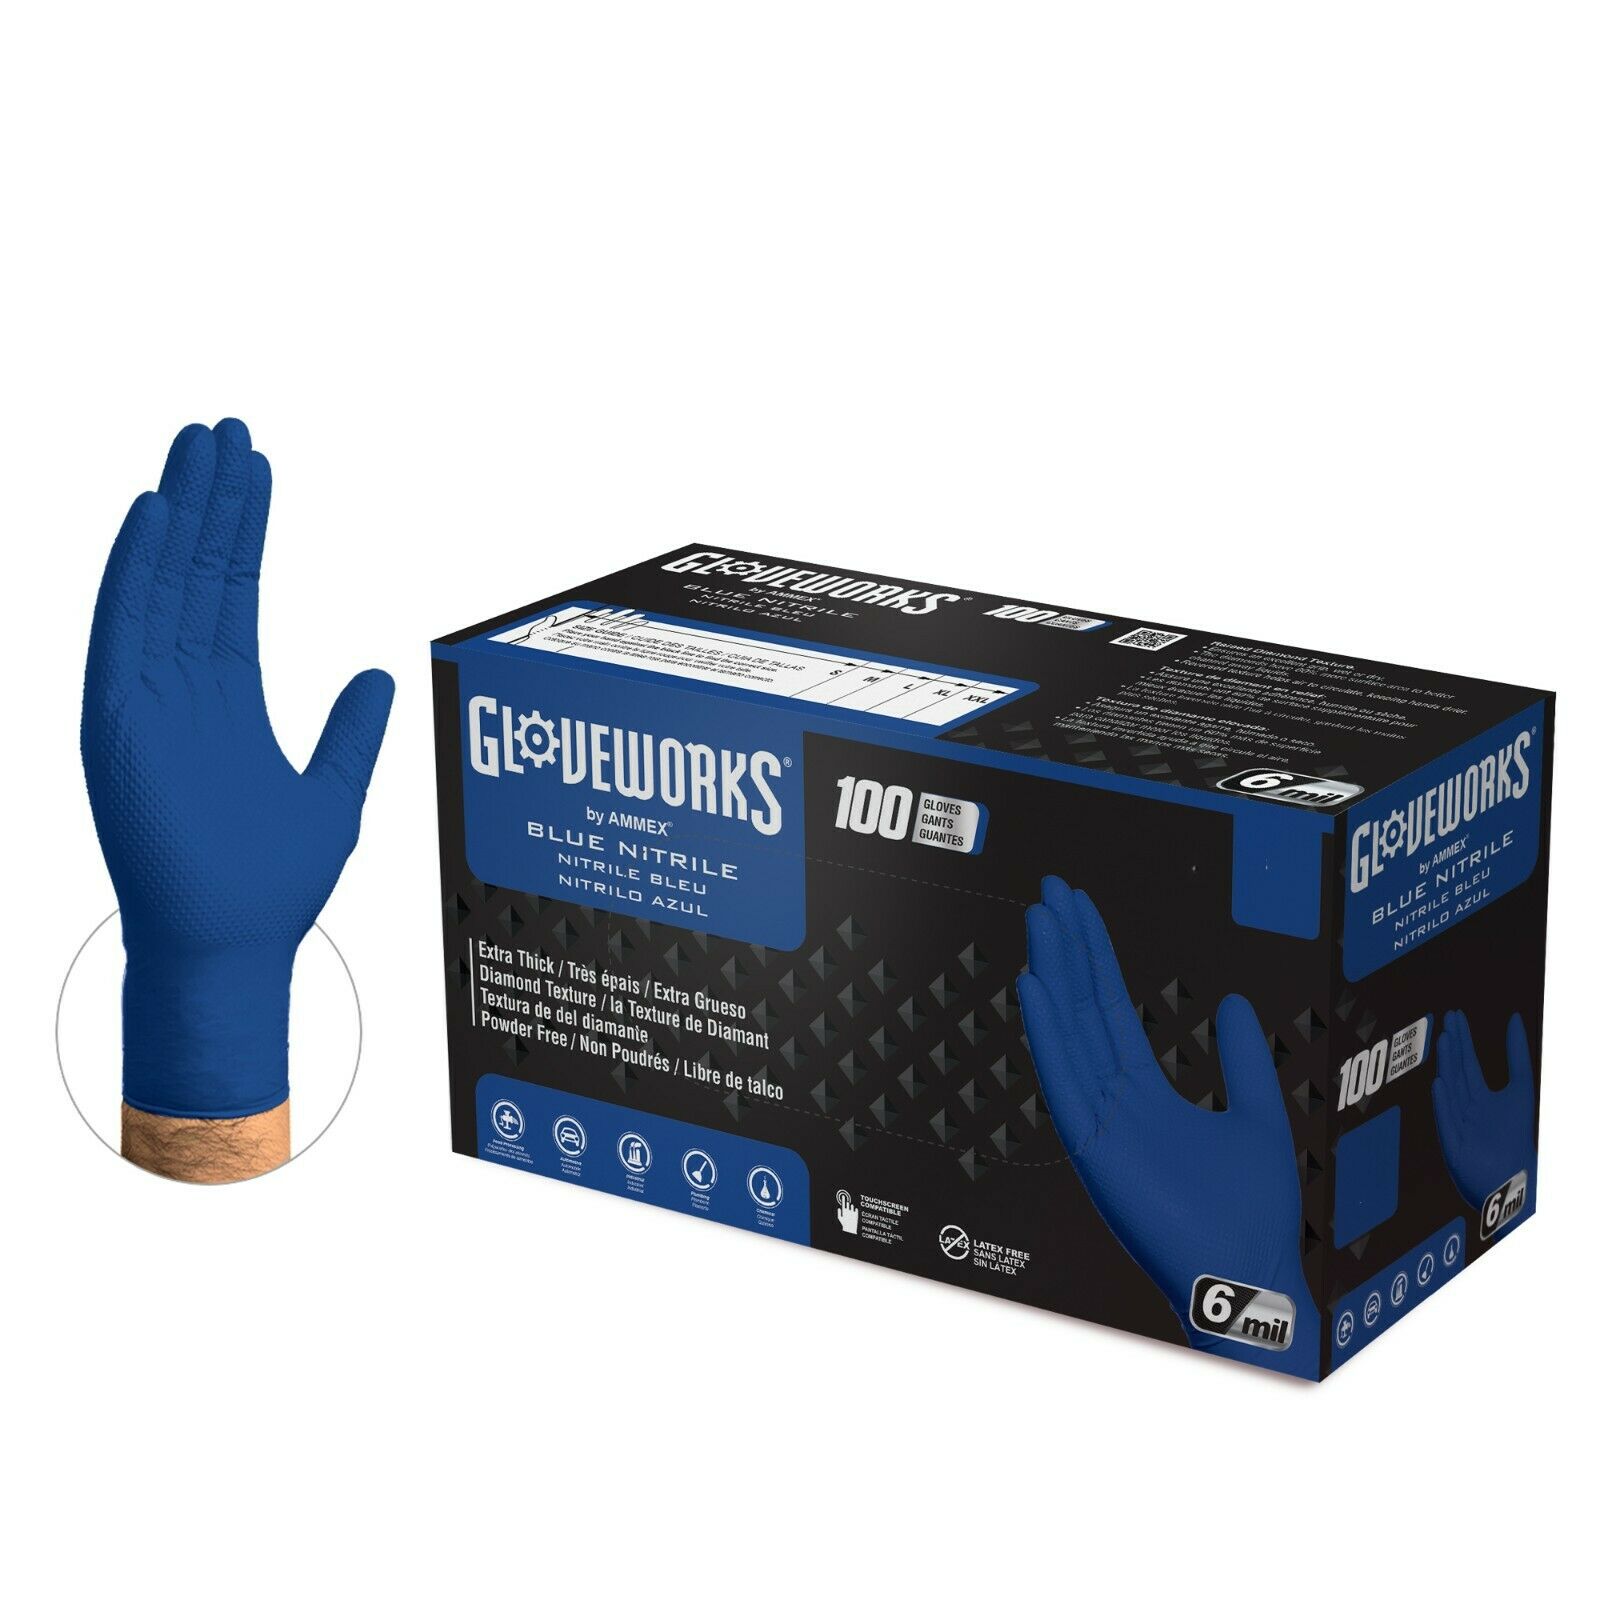 1000/cs Gloveworks Hd 6 Mil Gwrbn Latex Free Nitrile Disposable Gloves - Blue